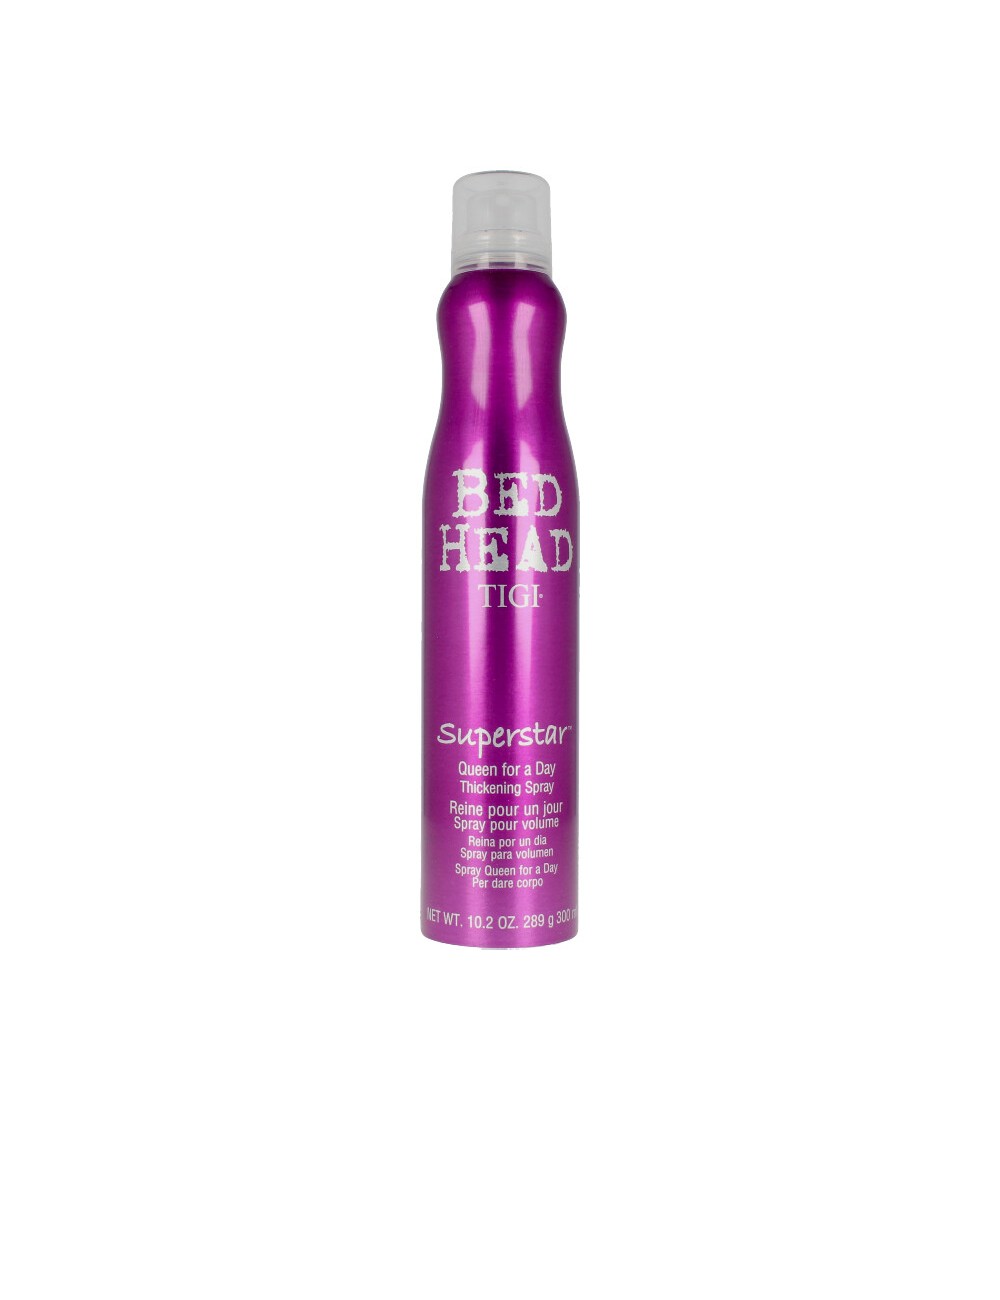 BED HEAD SUPERSTAR queen for a day thickening spray 300ml